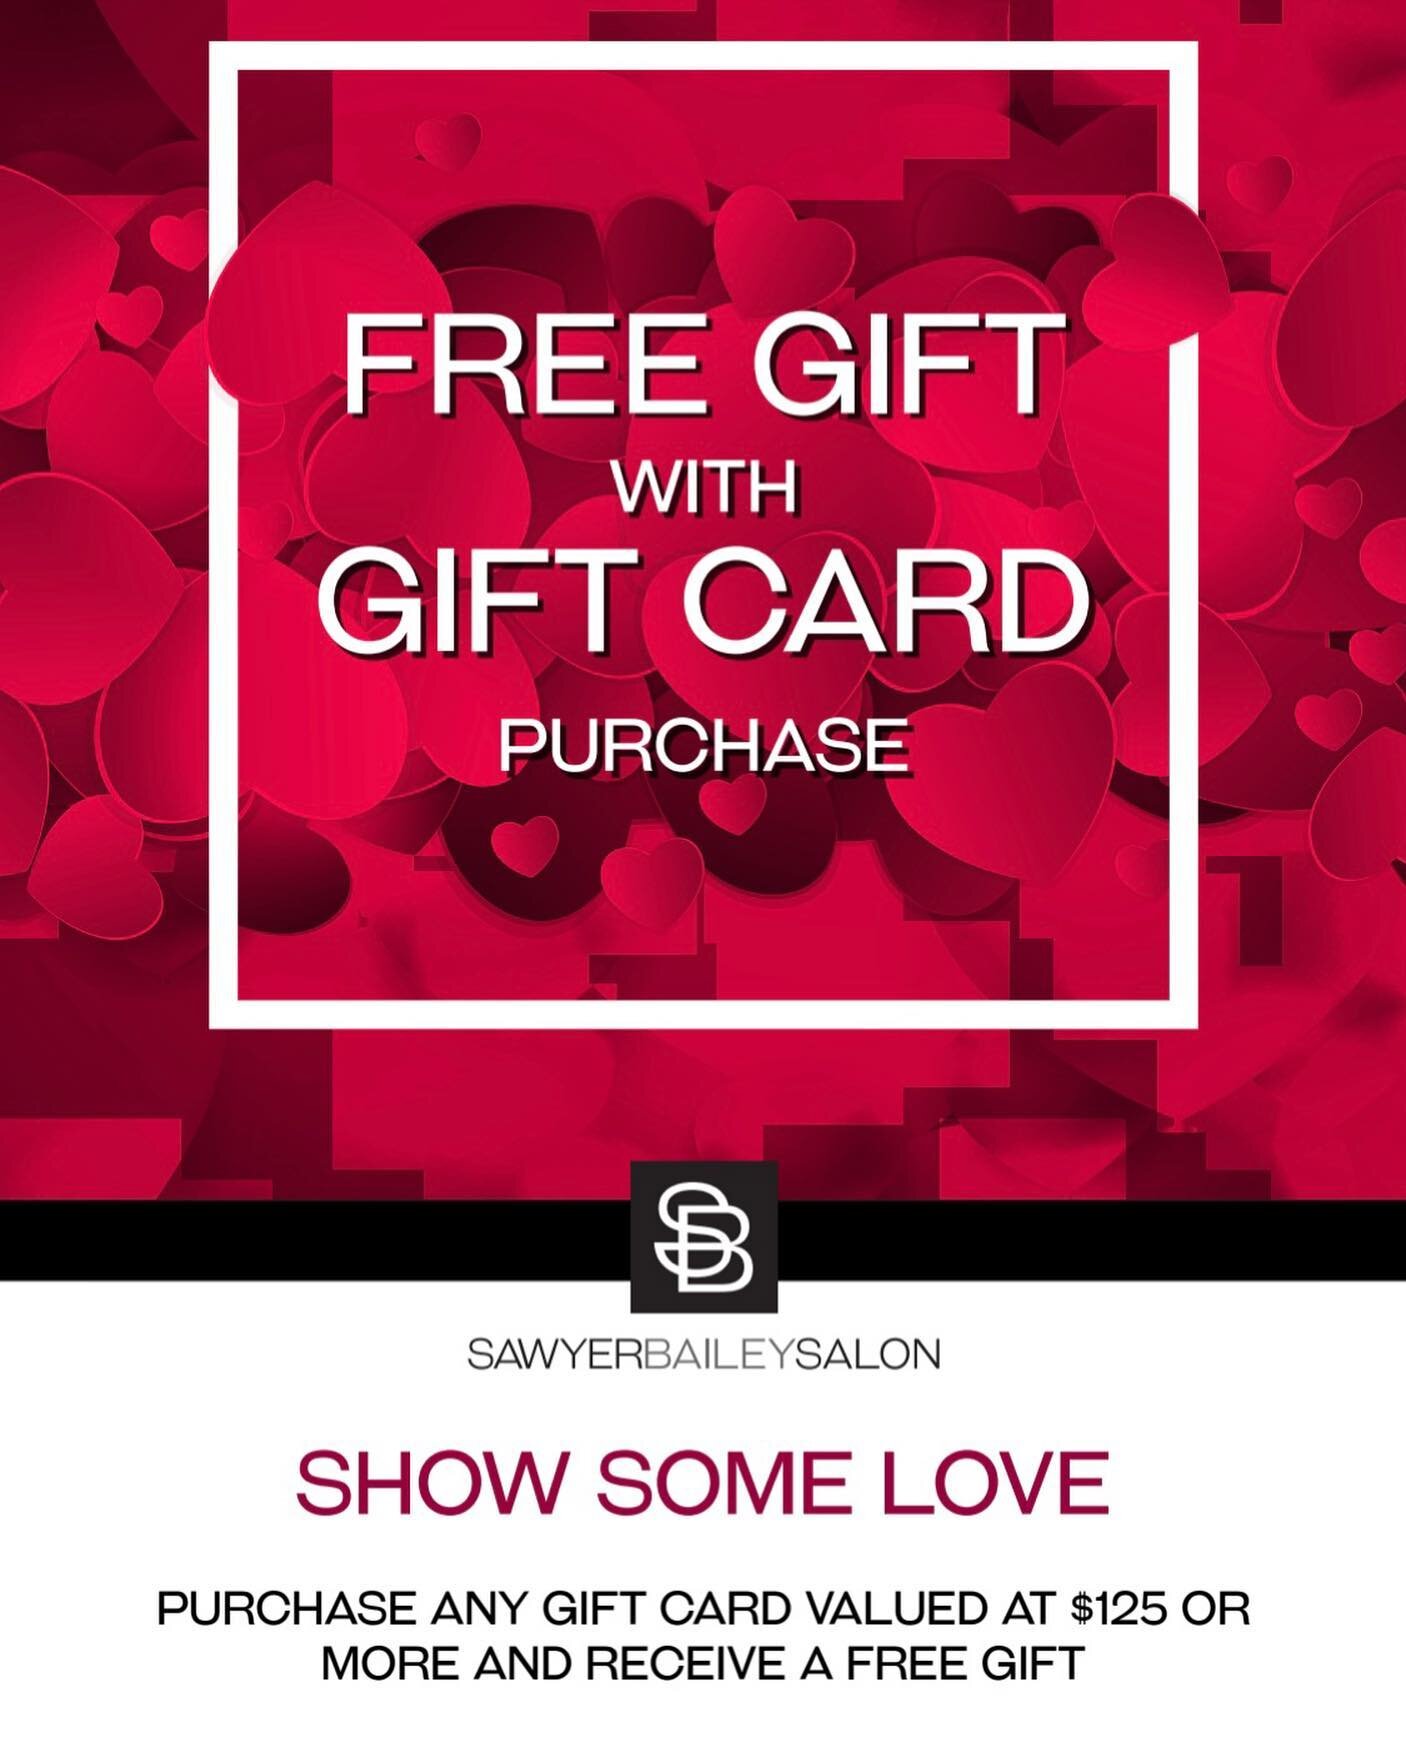 Show some love ❤️ Purchase a gift card valued at $125 or greater and receive a free gift!